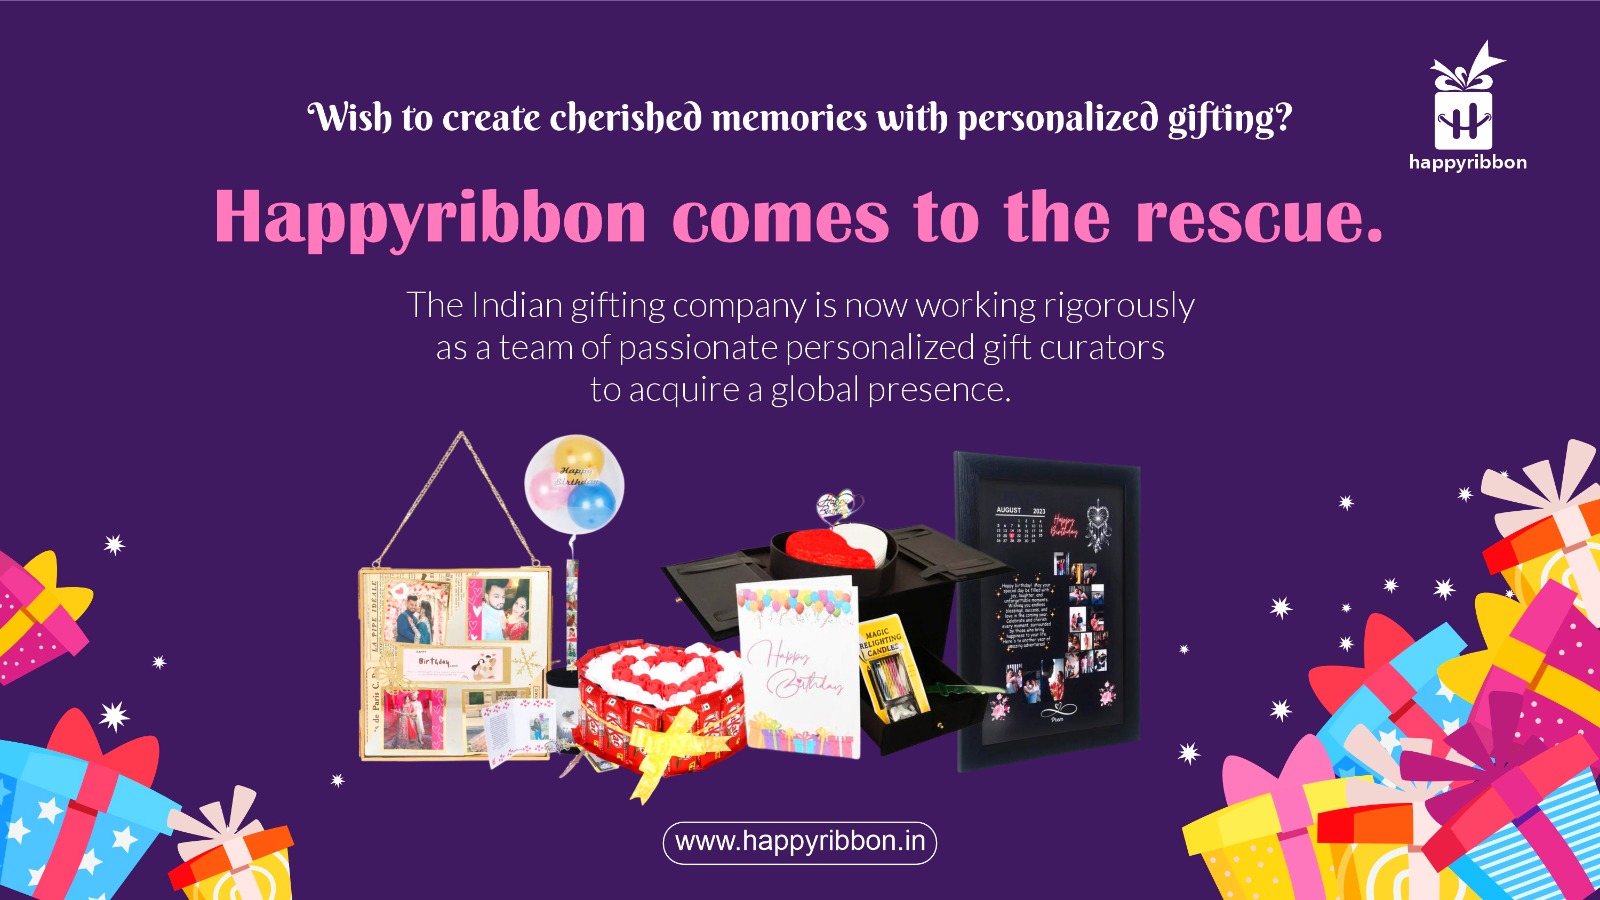 Happyribbon: Revolutionizing the Gifting Experience with Innovation and Growth